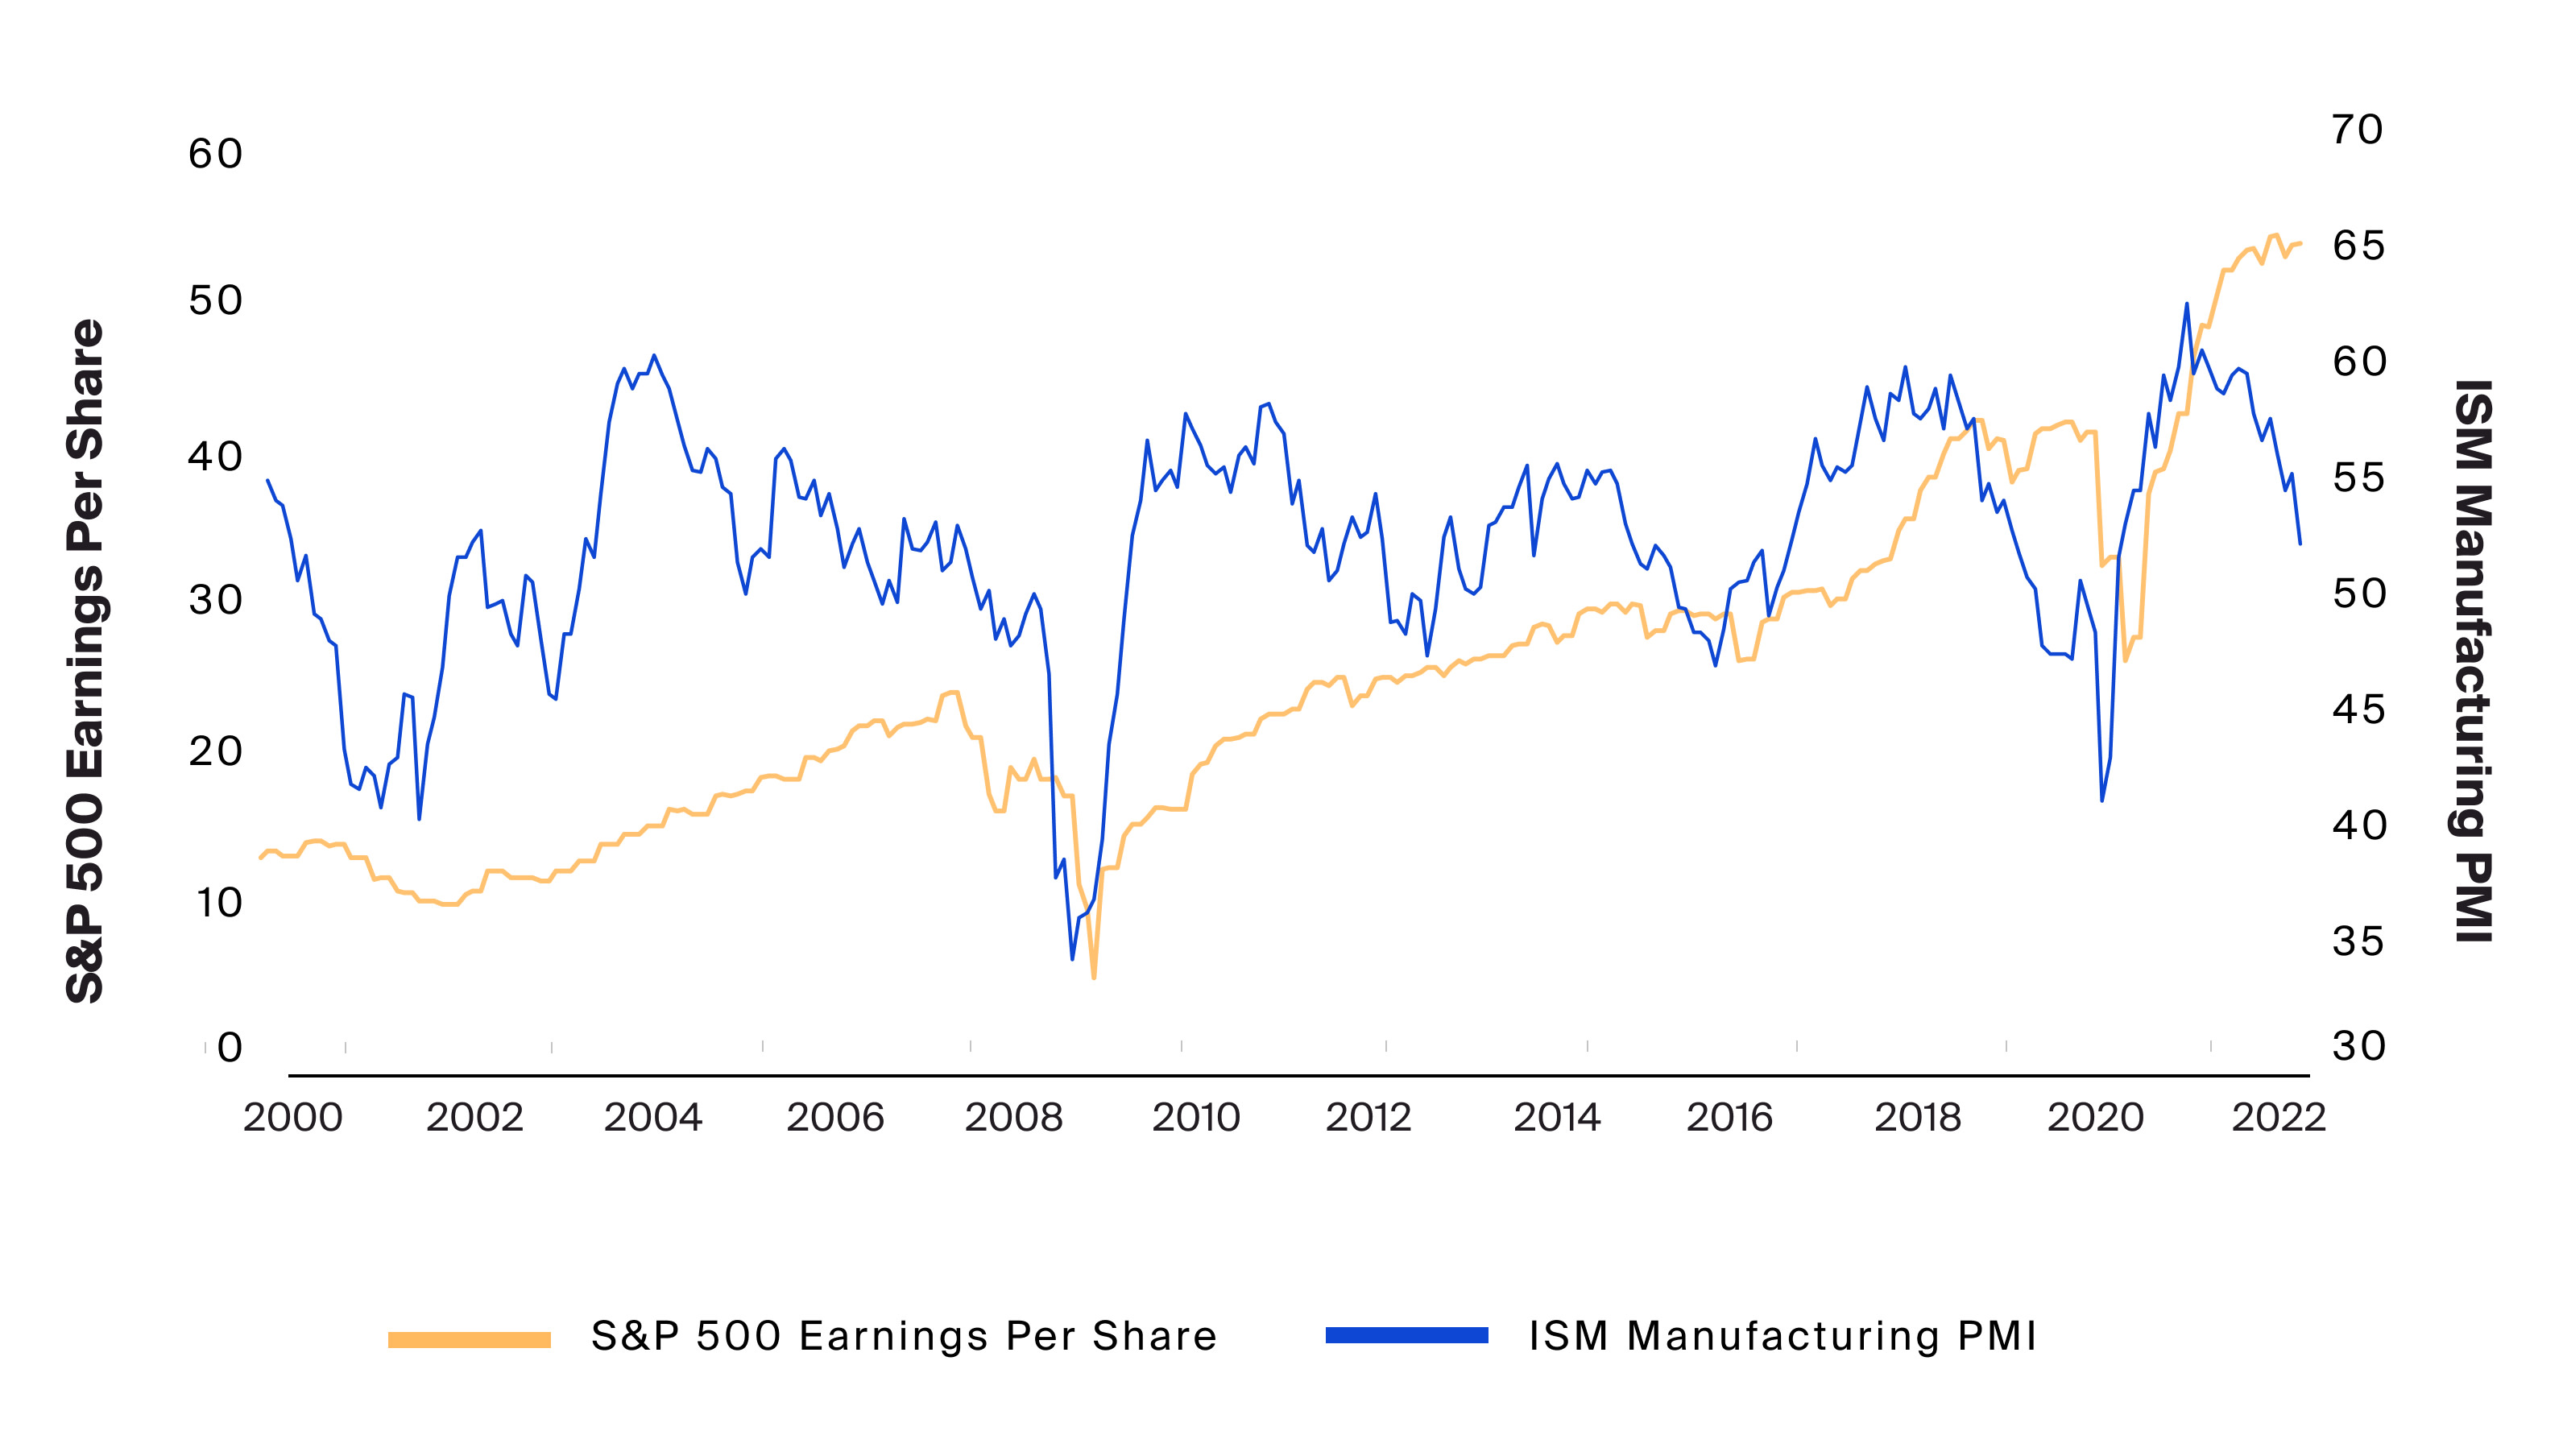 The ISM Manufacturing Index’s downward trend may signal trouble for earnings in coming quarters (Exhibit 2)